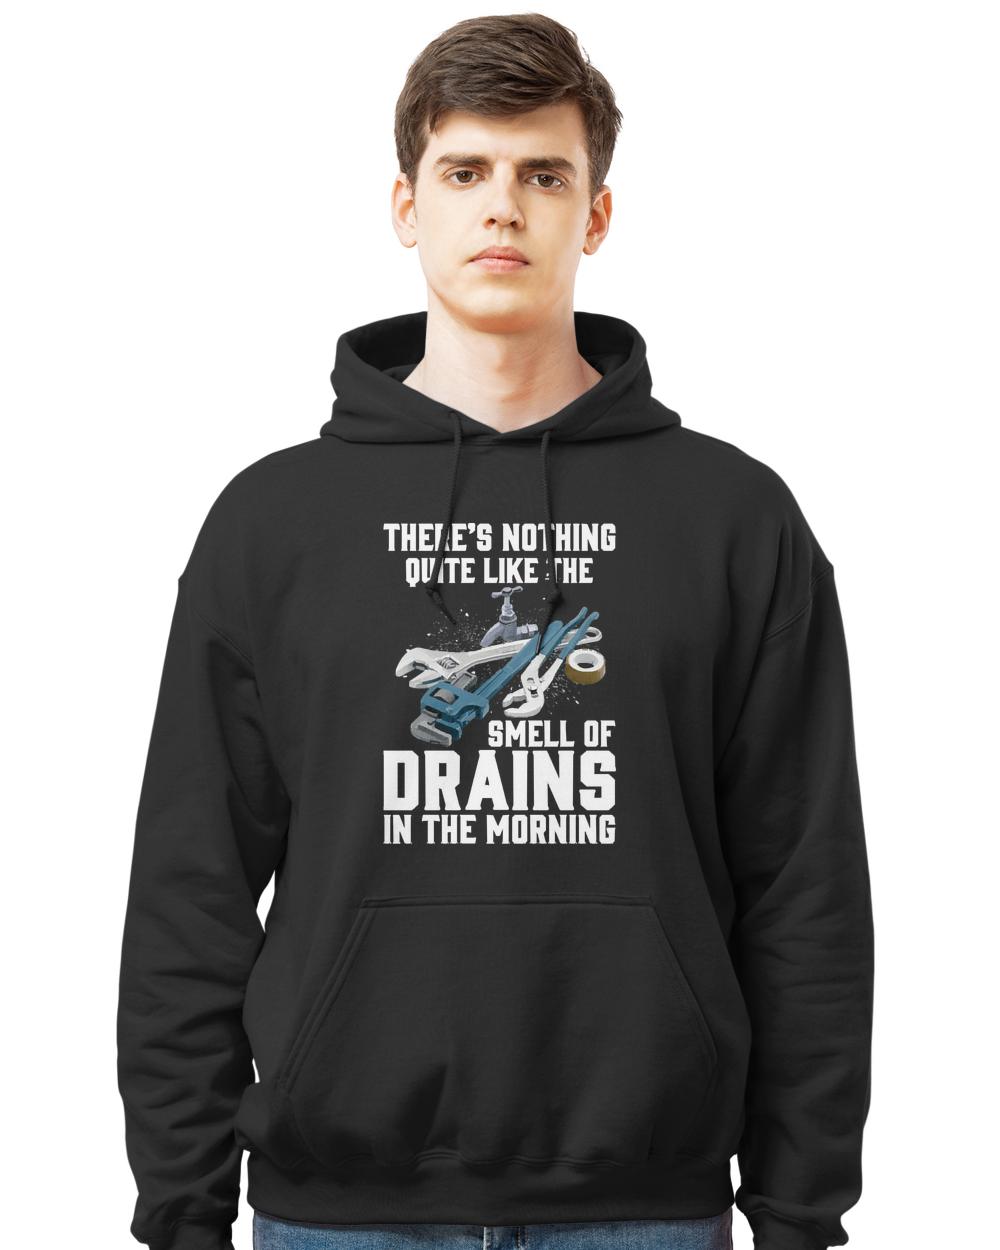 Plumber Funny T- Shirt There's Nothing Quite Like The Smell Of Drains In The Morning T- Shirt